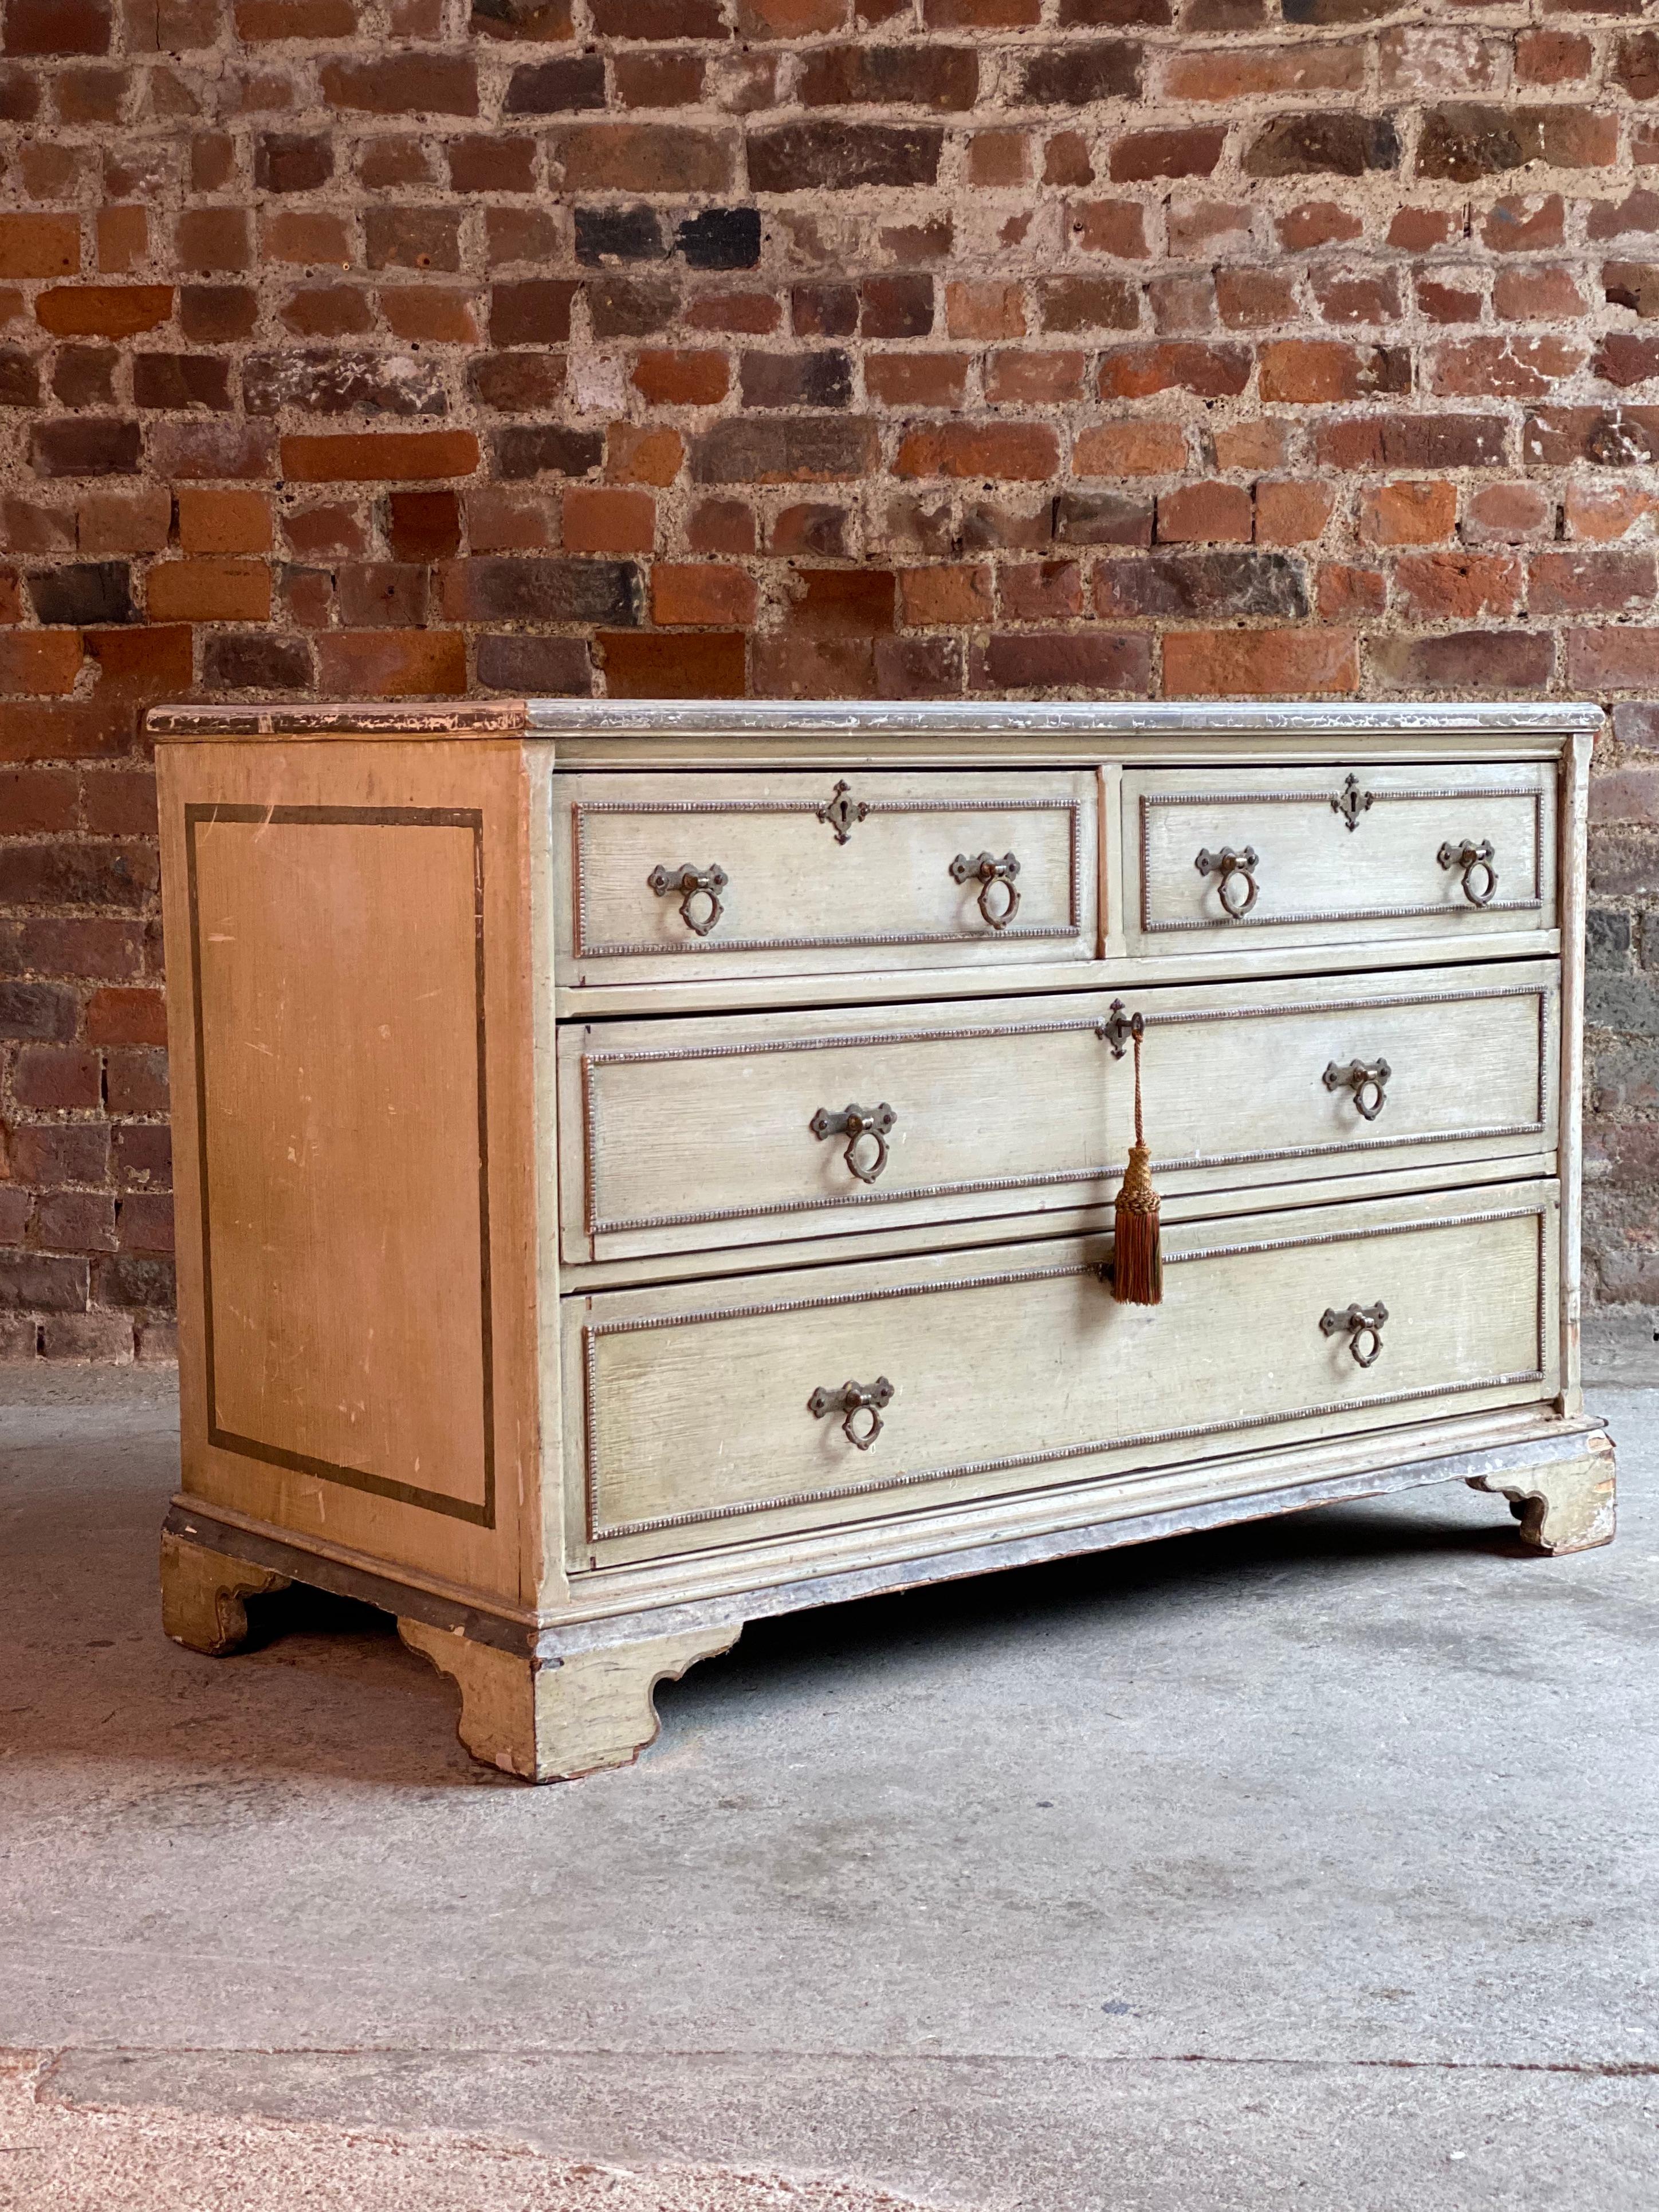 Antique Gustavian chest of drawers commode Swedish 19th century circa 1870

A magnificent 19th century Swedish Gustavian four drawer chest of drawers circa 1870, the rectangular top sitting above two short over two long drawers, the drawer fronts